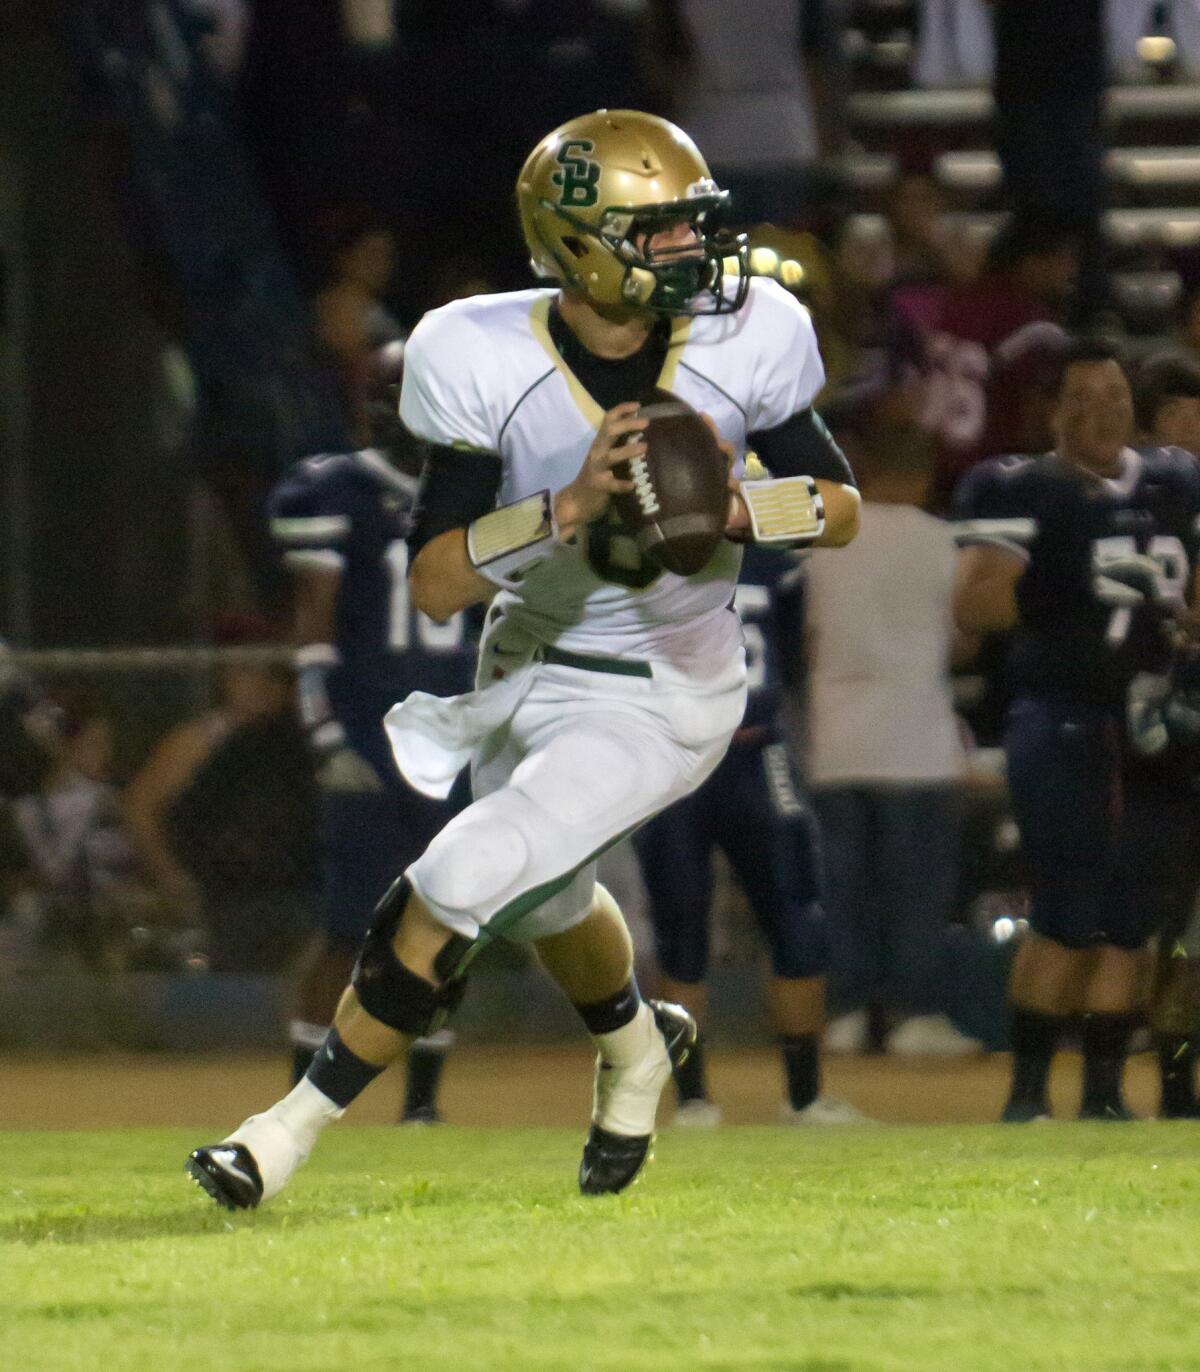 St. Bonaventure quarterback Ricky Town has signed a financial aid agreement with USC.